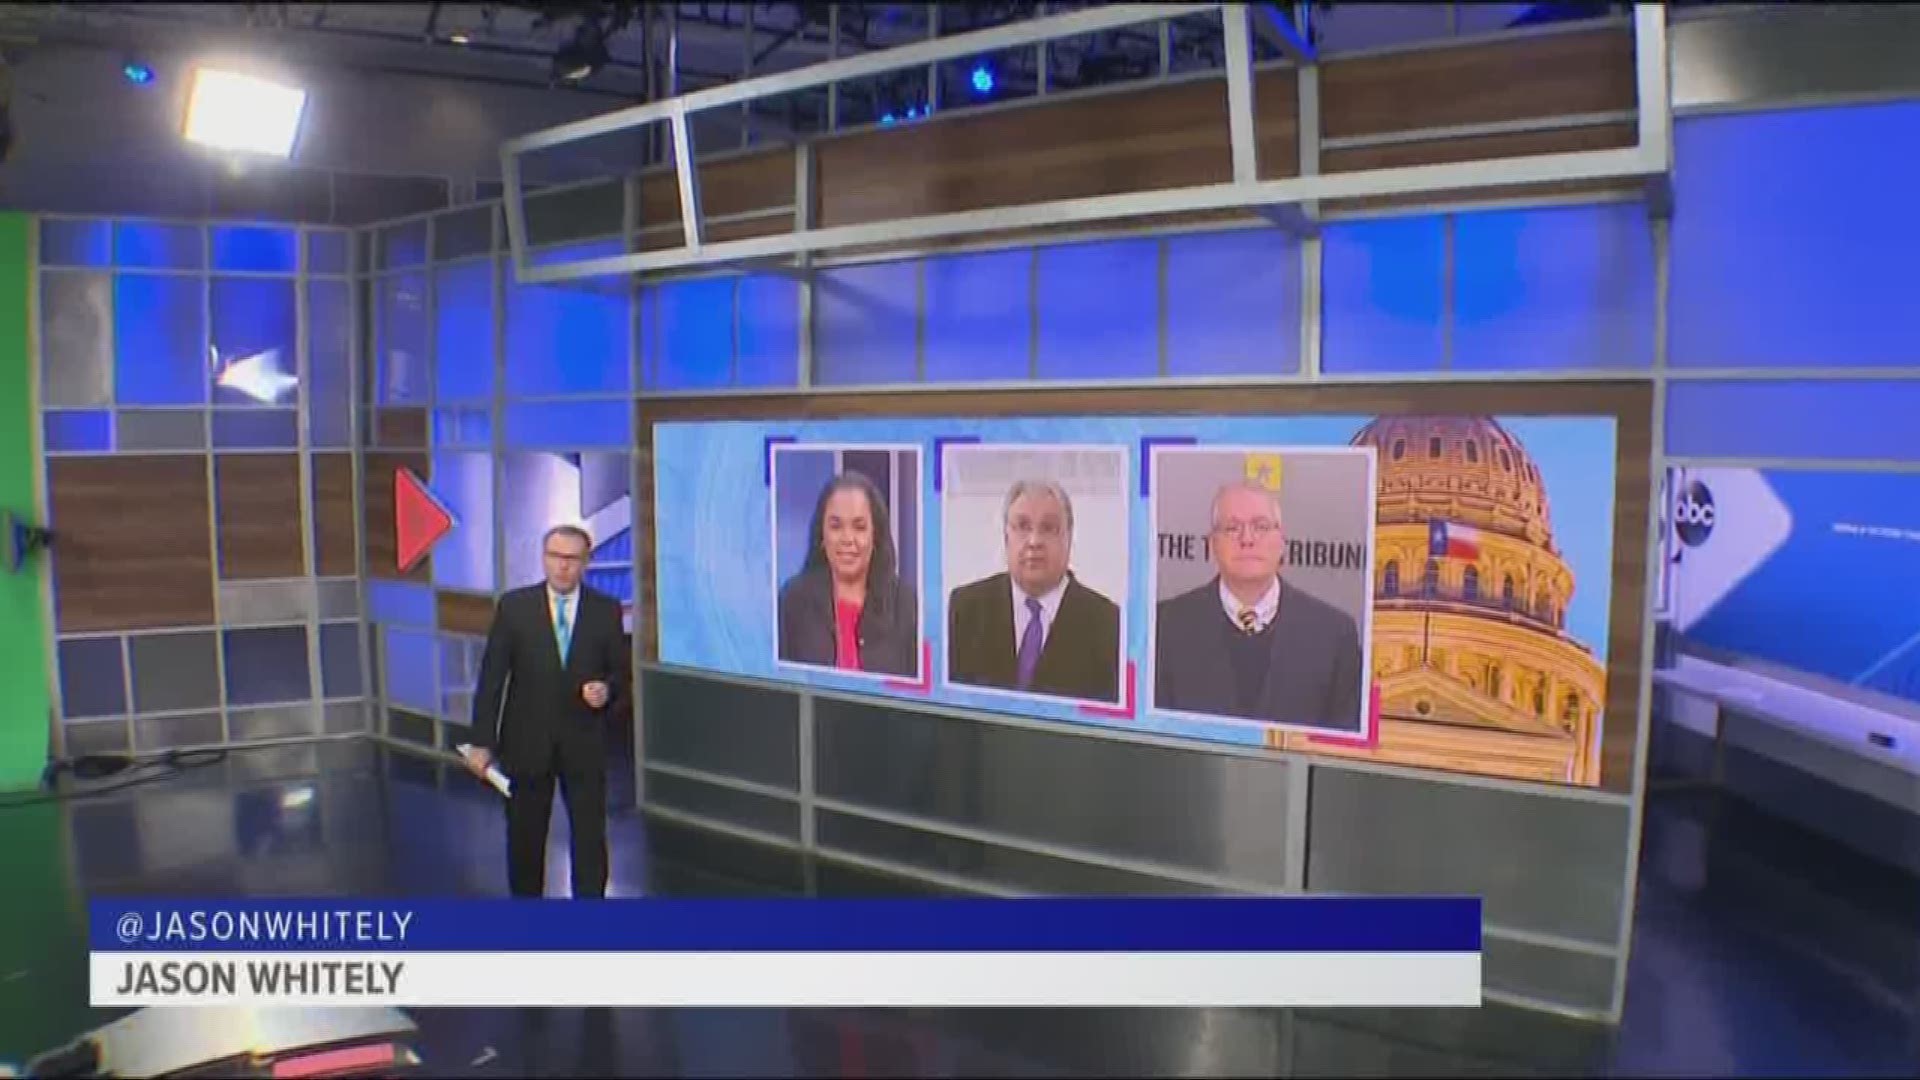 Reporters Roundtable puts the headlines in perspective each week. Ross Ramsey and Bud Kennedy returned along with Berna Dean Steptoe, WFAA's political producer. Ross, Bud, and Berna Dean discussed whether women were voting for Democrats or Democratic cand